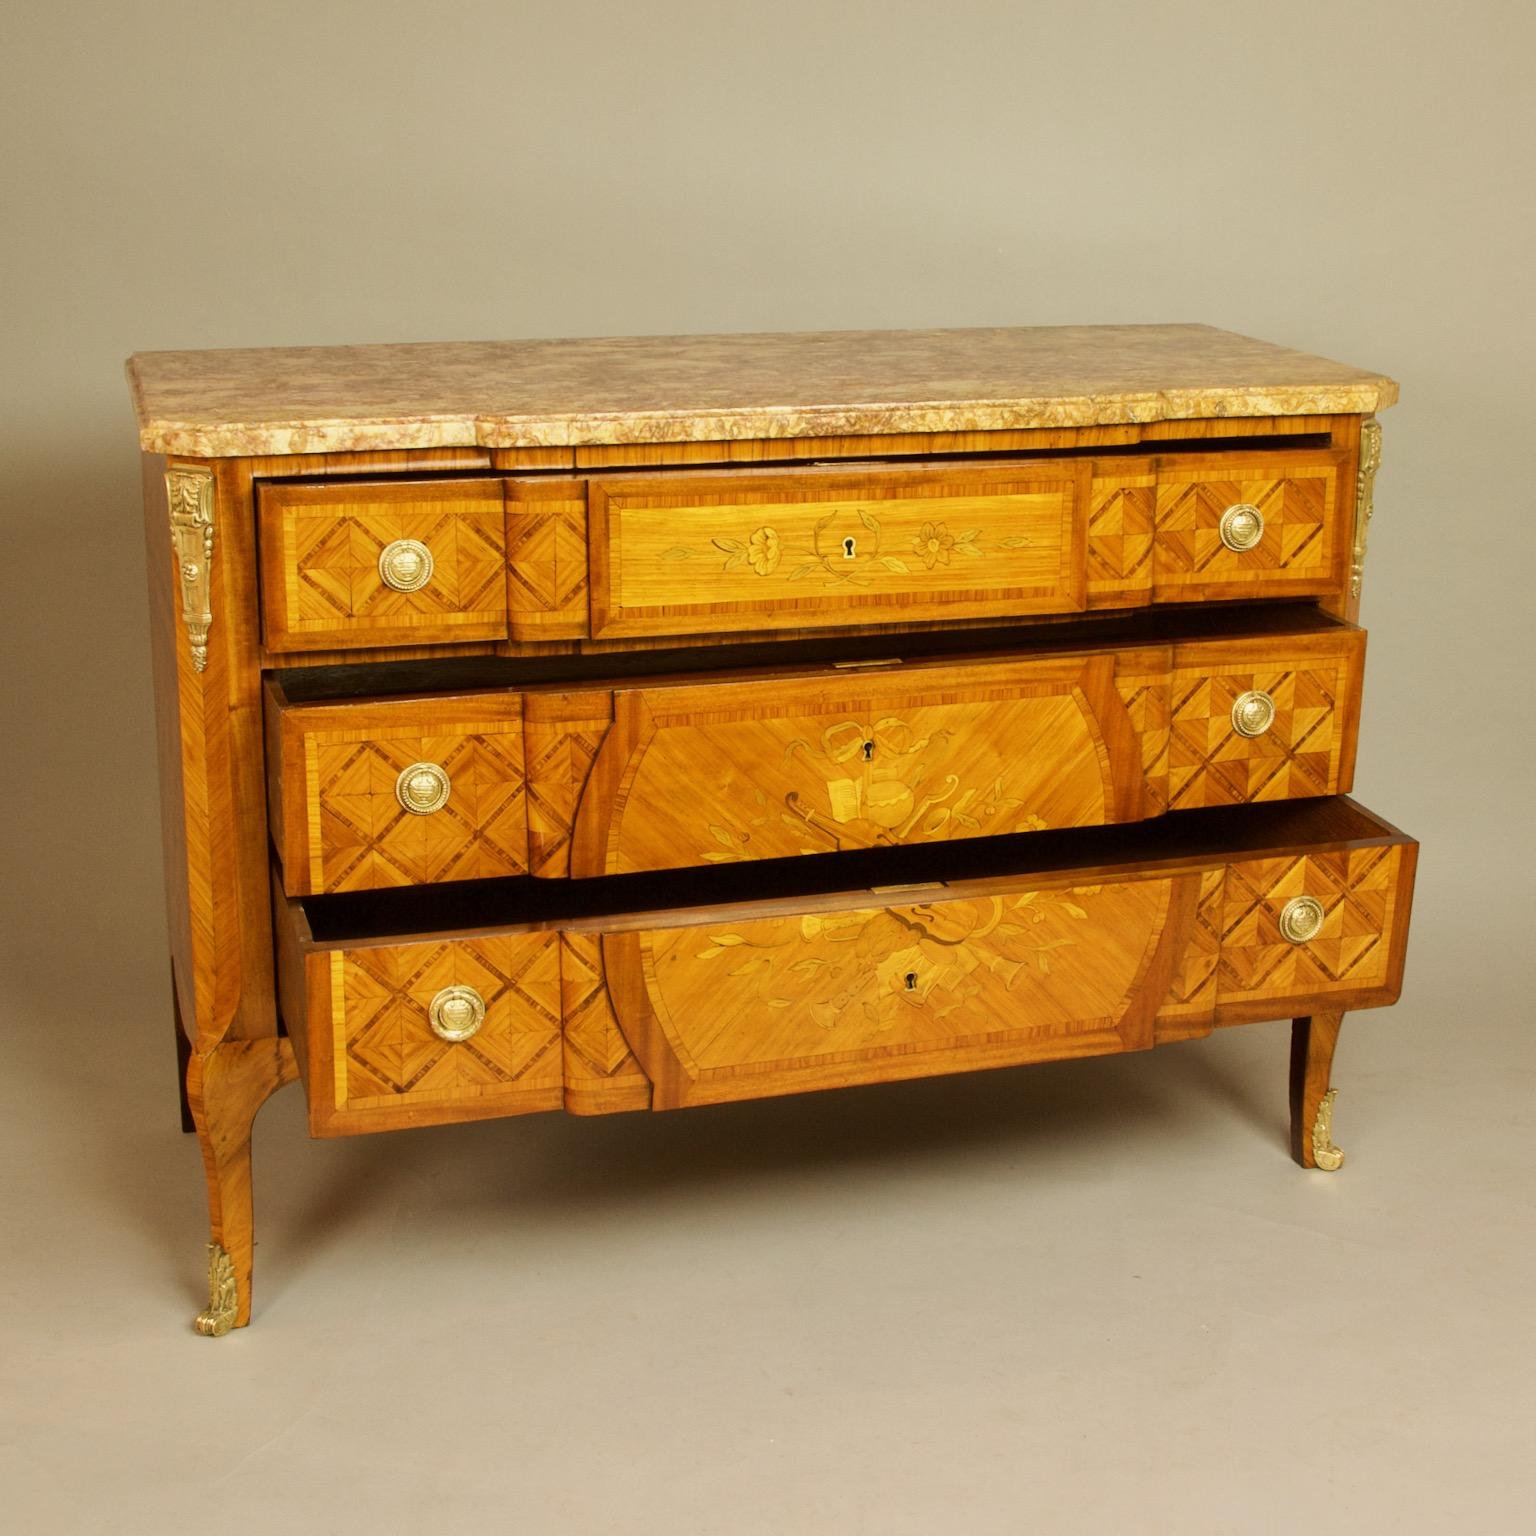 French 18th century Transition/Louis XVI love symbols marquetry gilt bronze mounted commode

An excellent large Transition/Louis XVI love symbol marquetry double breakfront or 